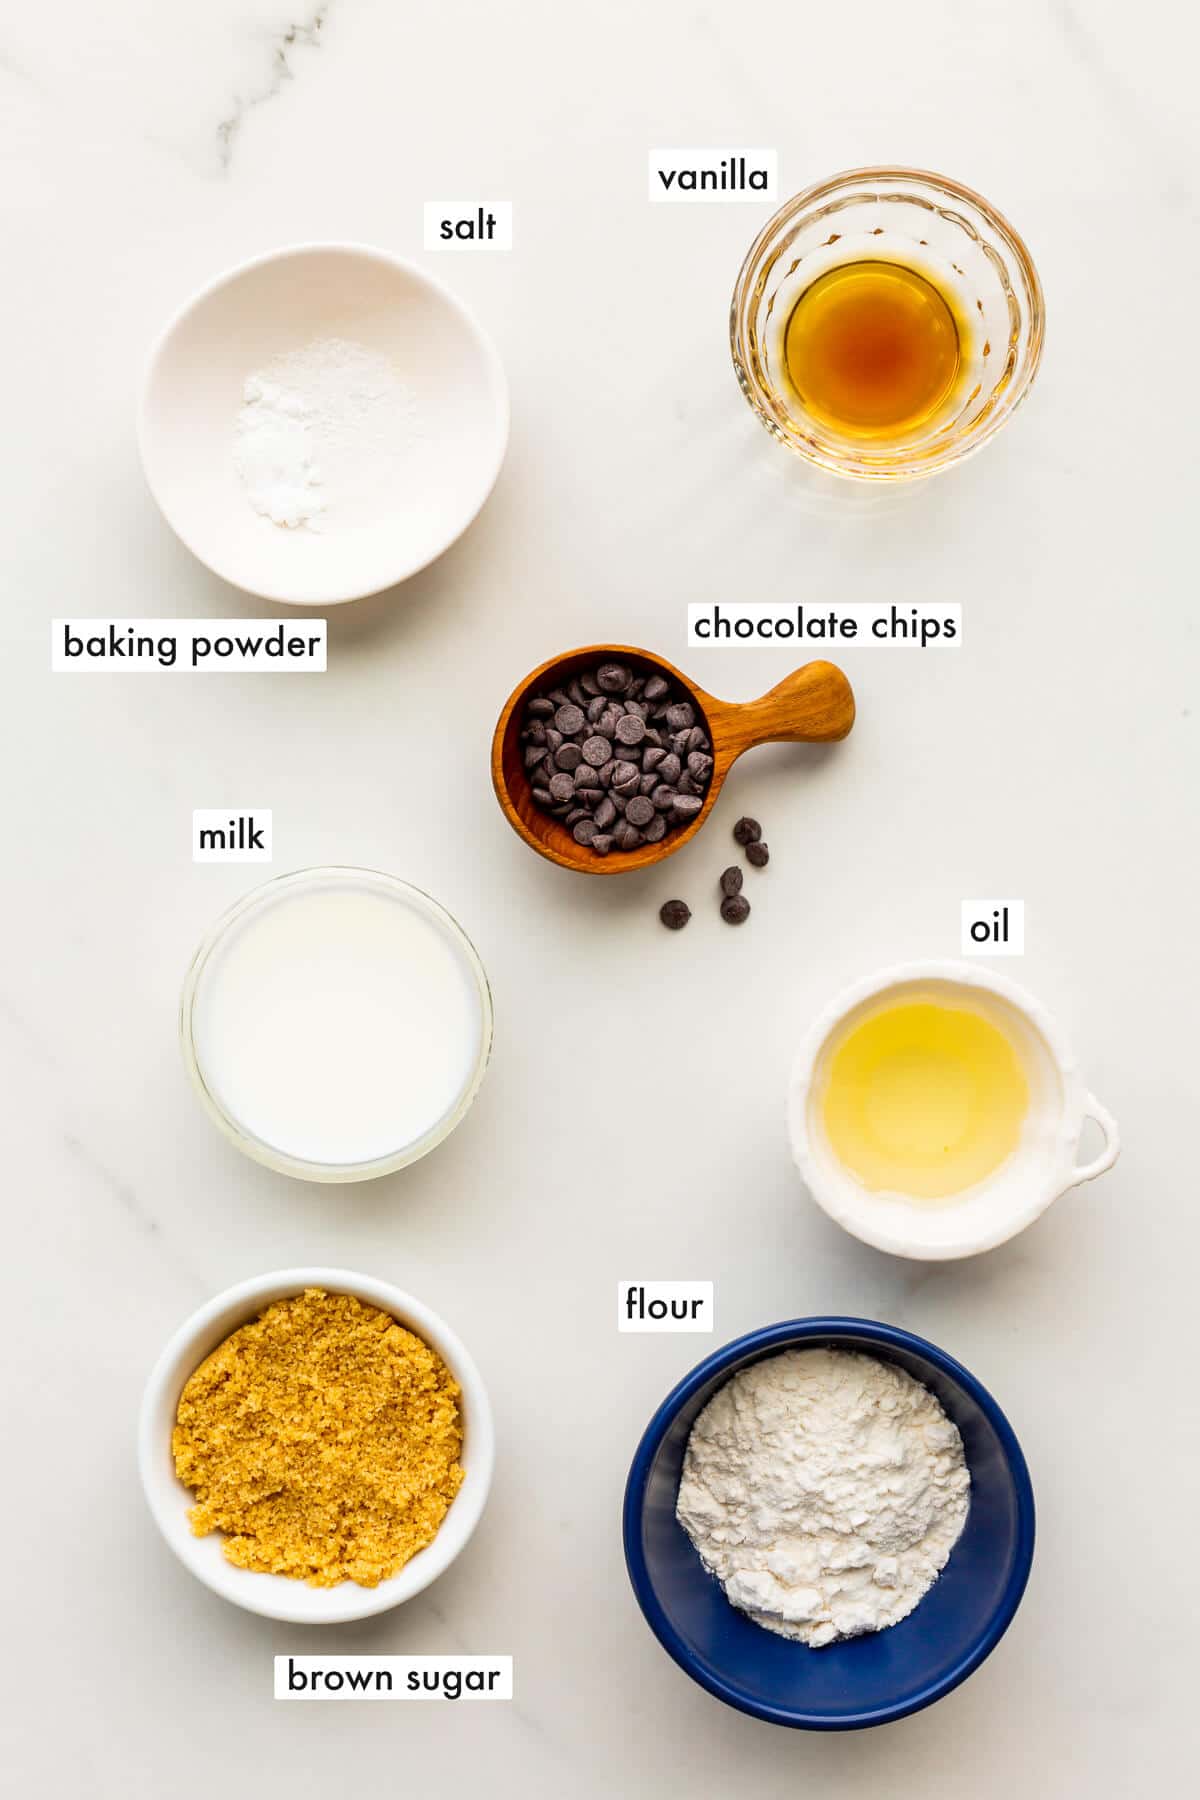 Ingredients to make a chocolate chip mug cake from scratch.